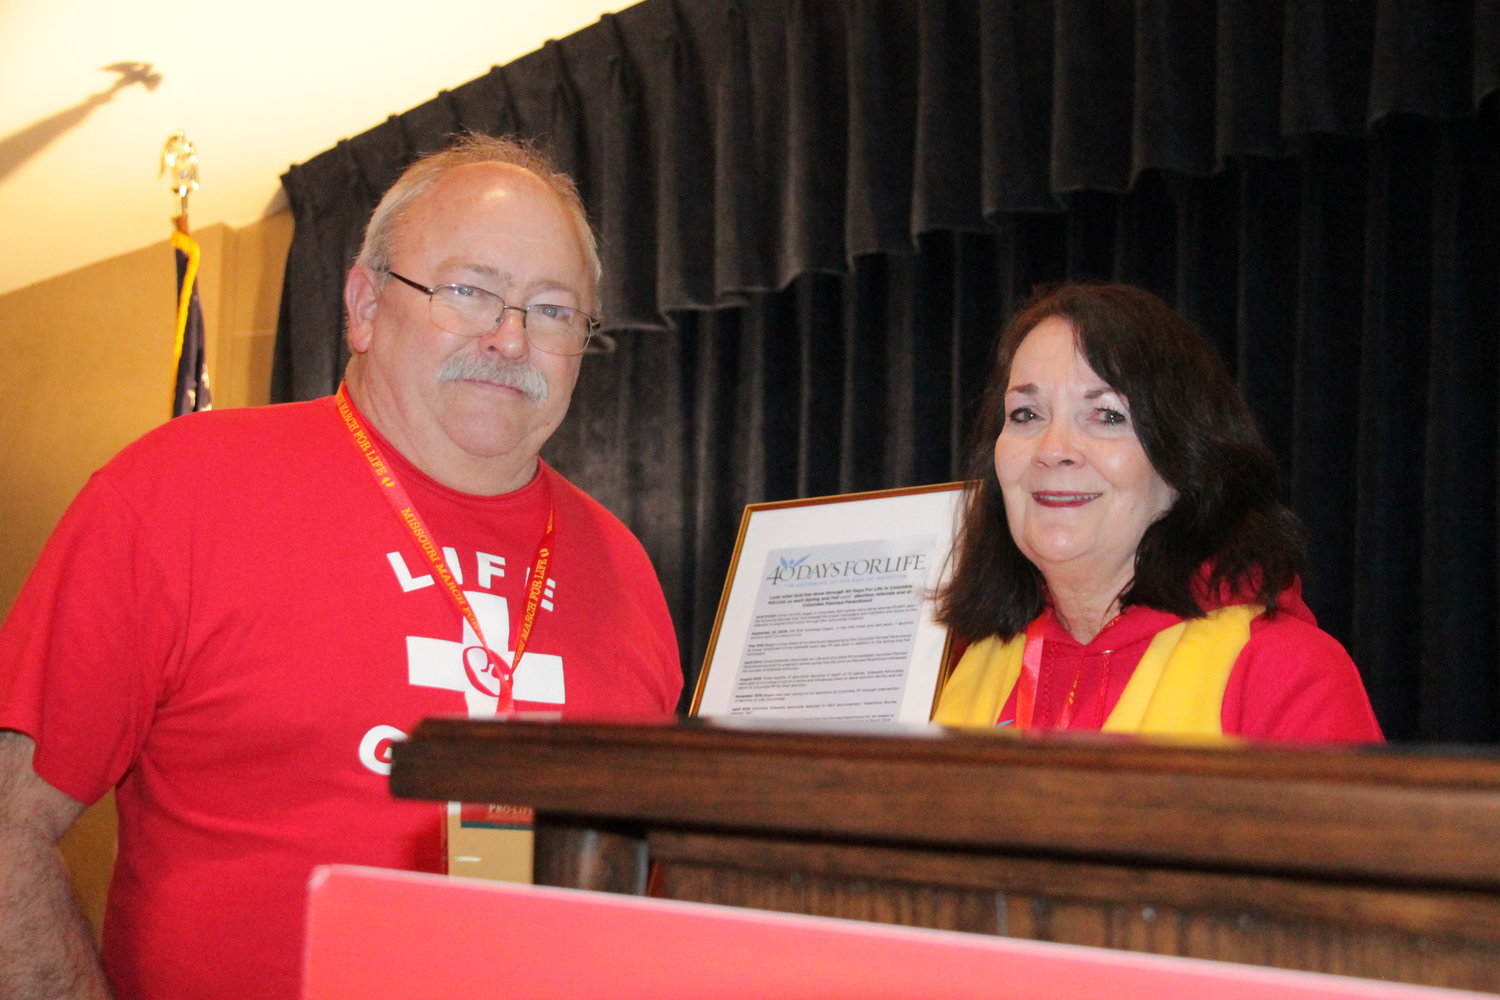 Mike and Kathy Forck, leaders of the Columbia 40 Days for Life Campaign and the Midwest March for Life, accept special recognition from 40 Days for Life during a rally at the end of this year’s march.